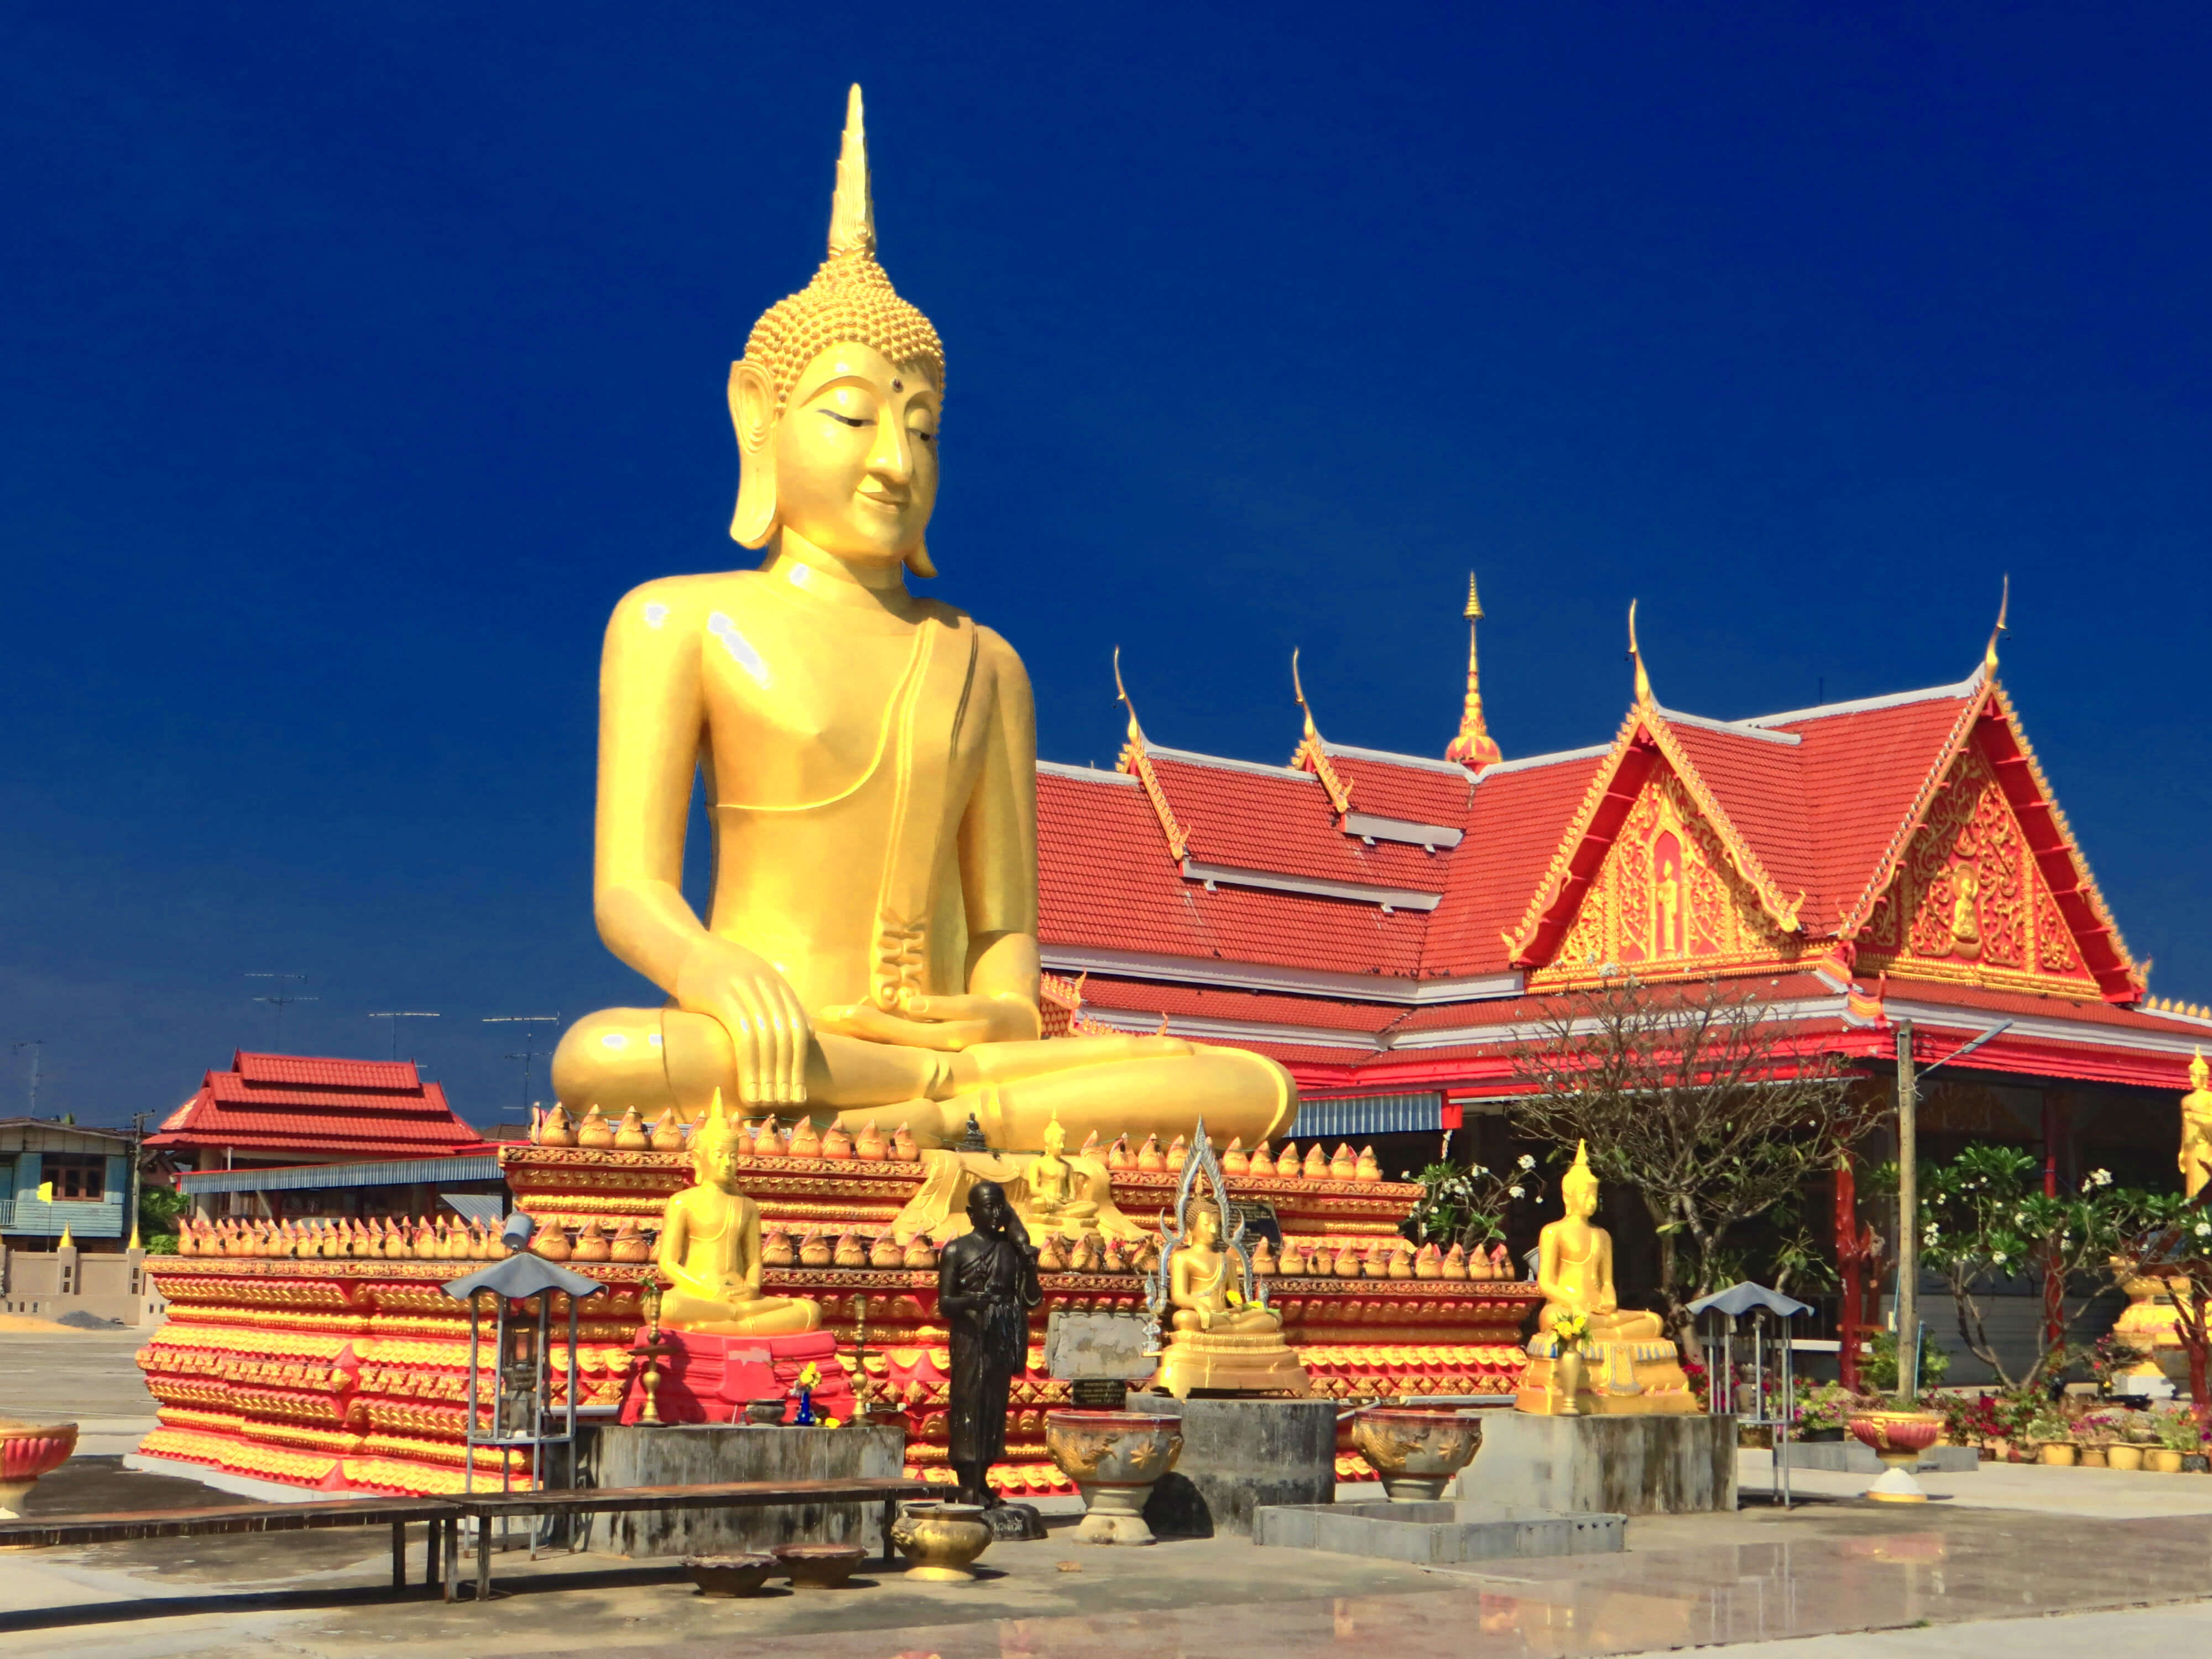 best thailand tour packages from hyderabad